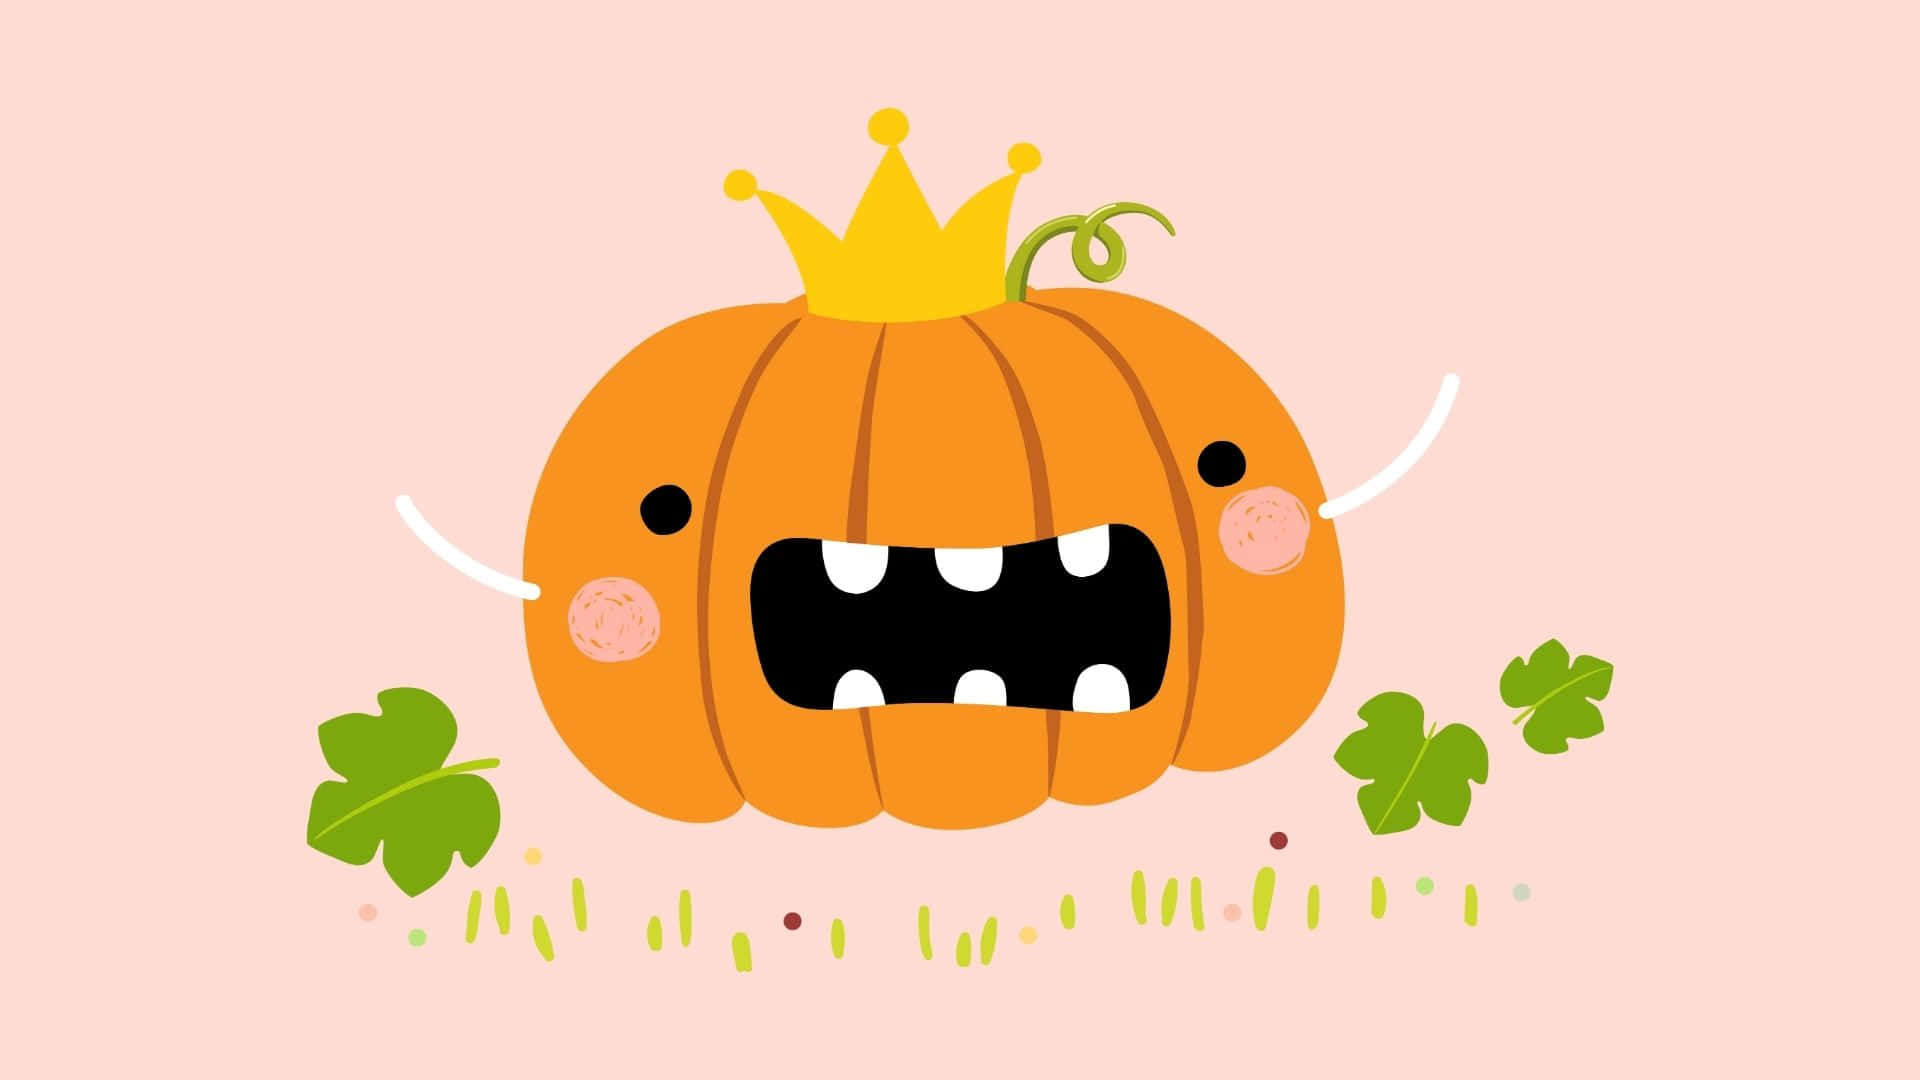 Adorable Pumpkin Smiling on a Rustic Wooden Table Wallpaper